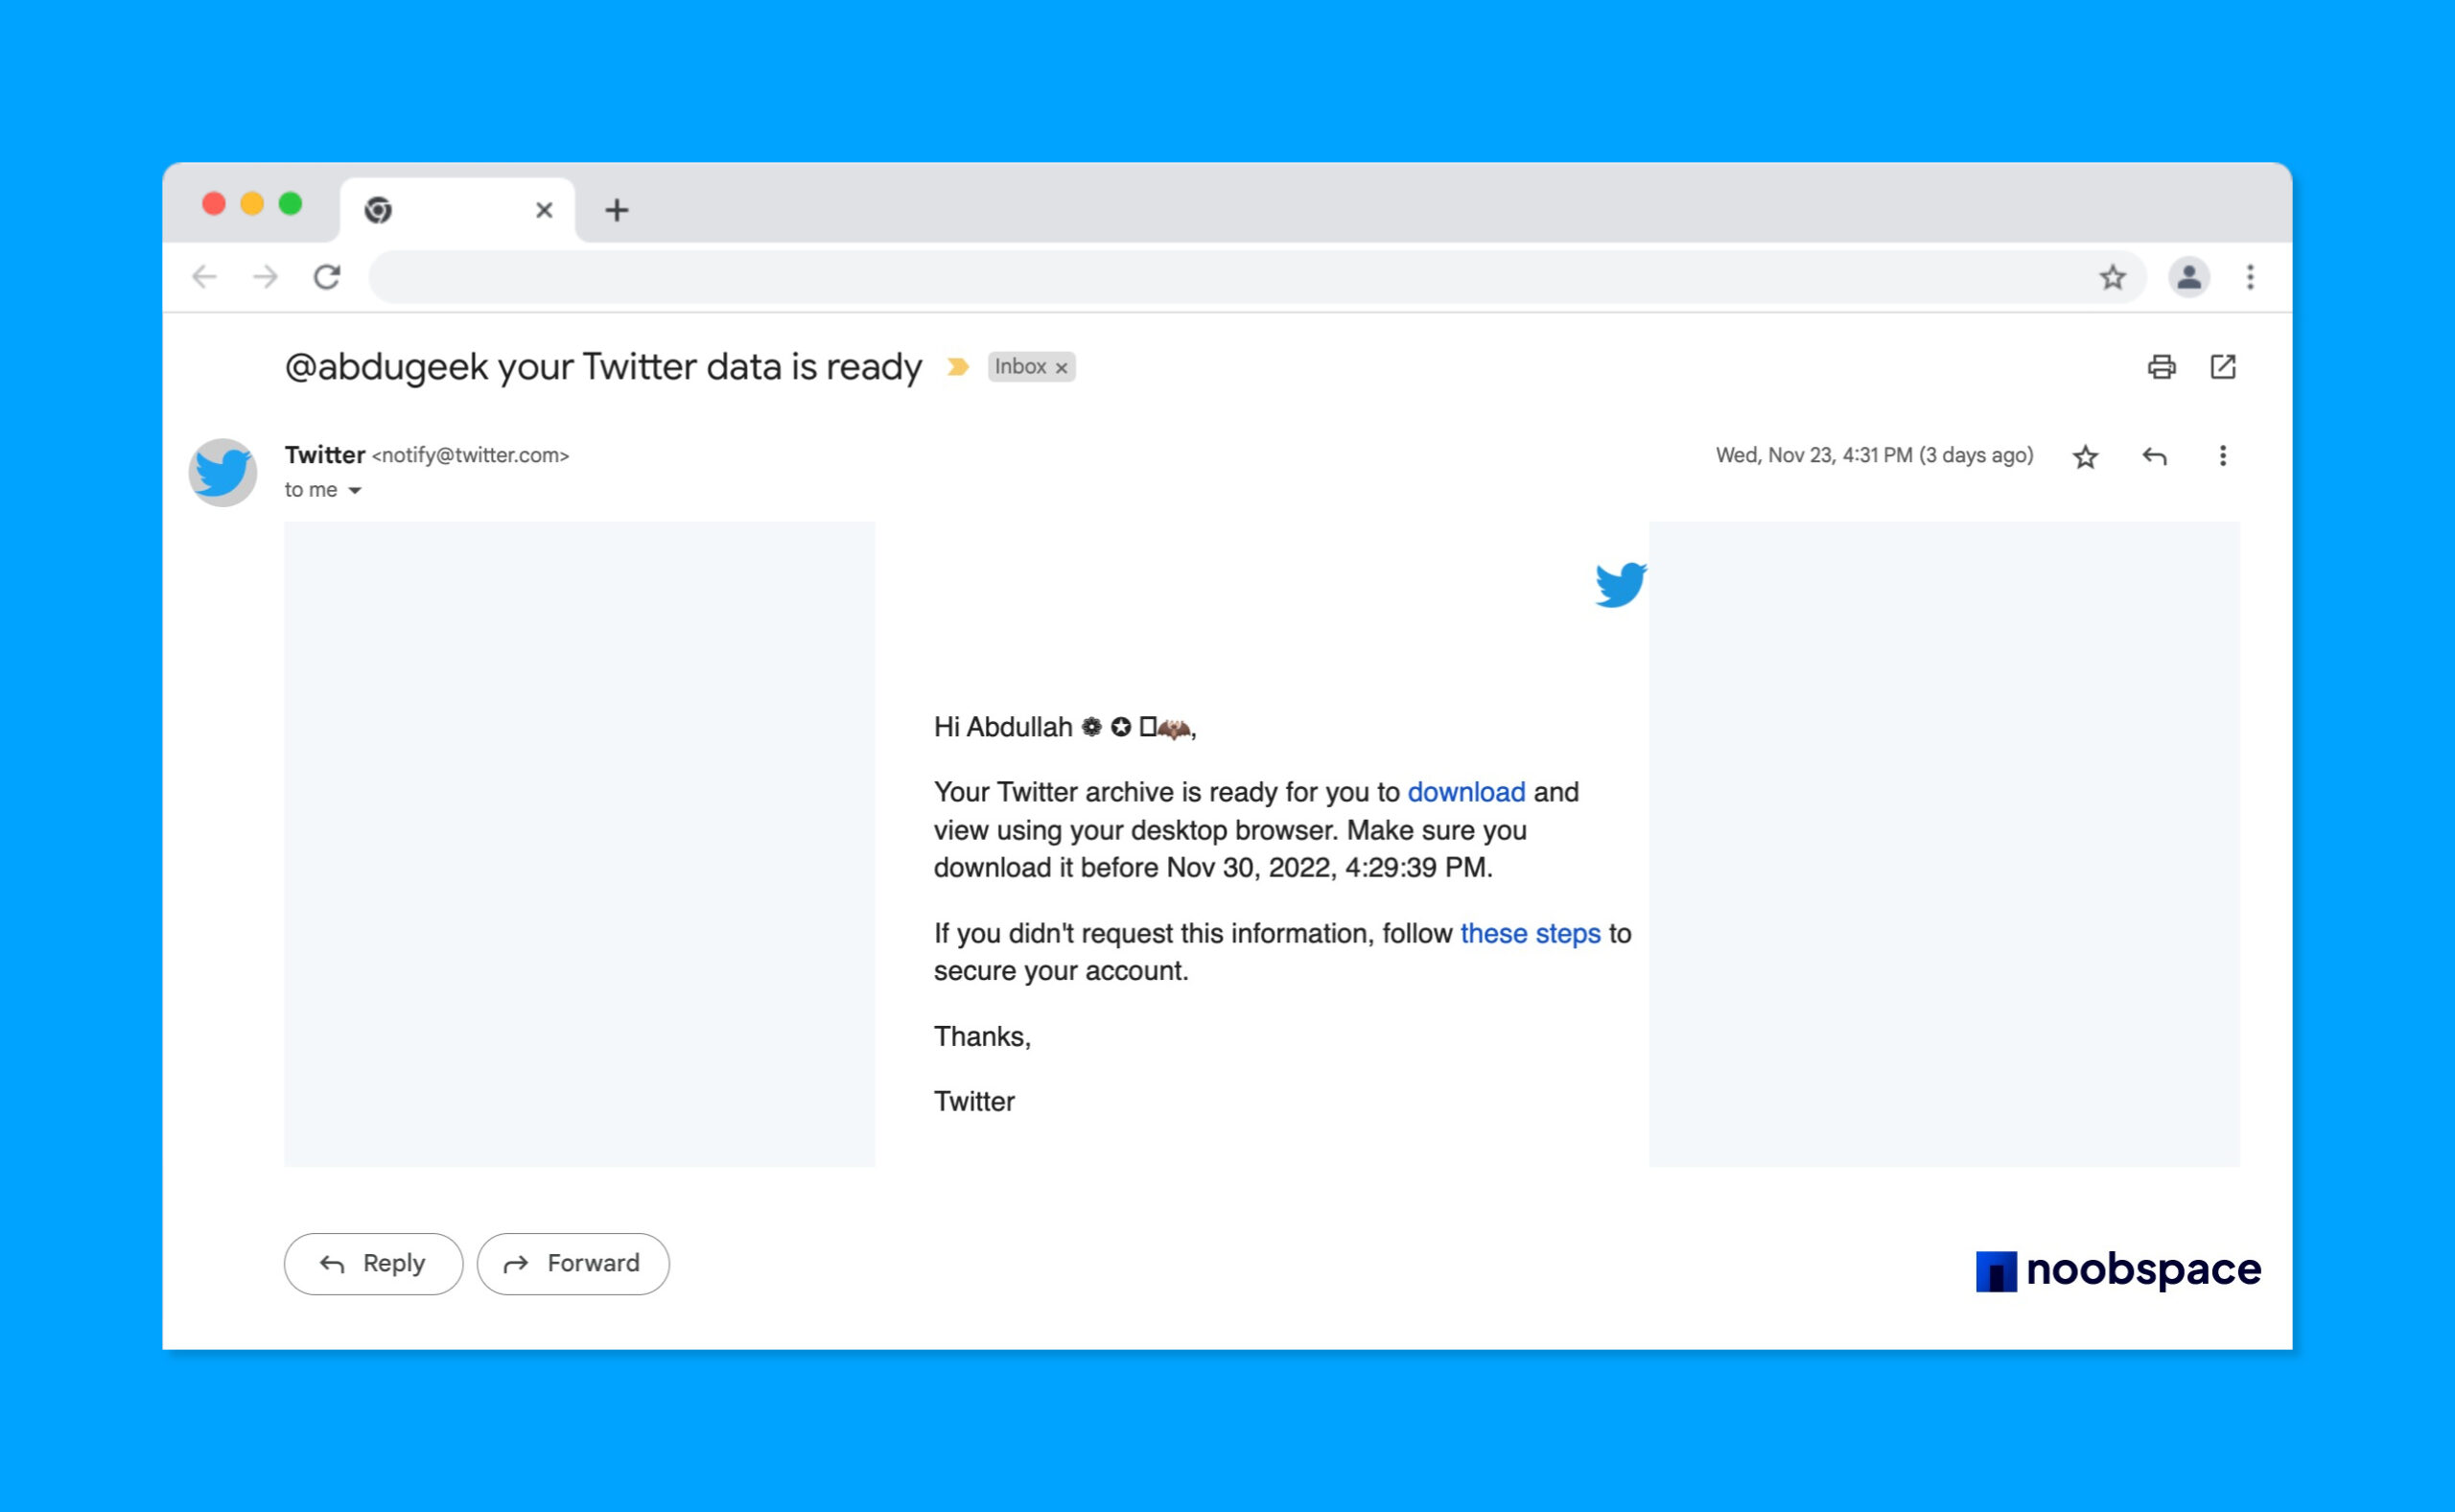 Twitter archive ready notification email